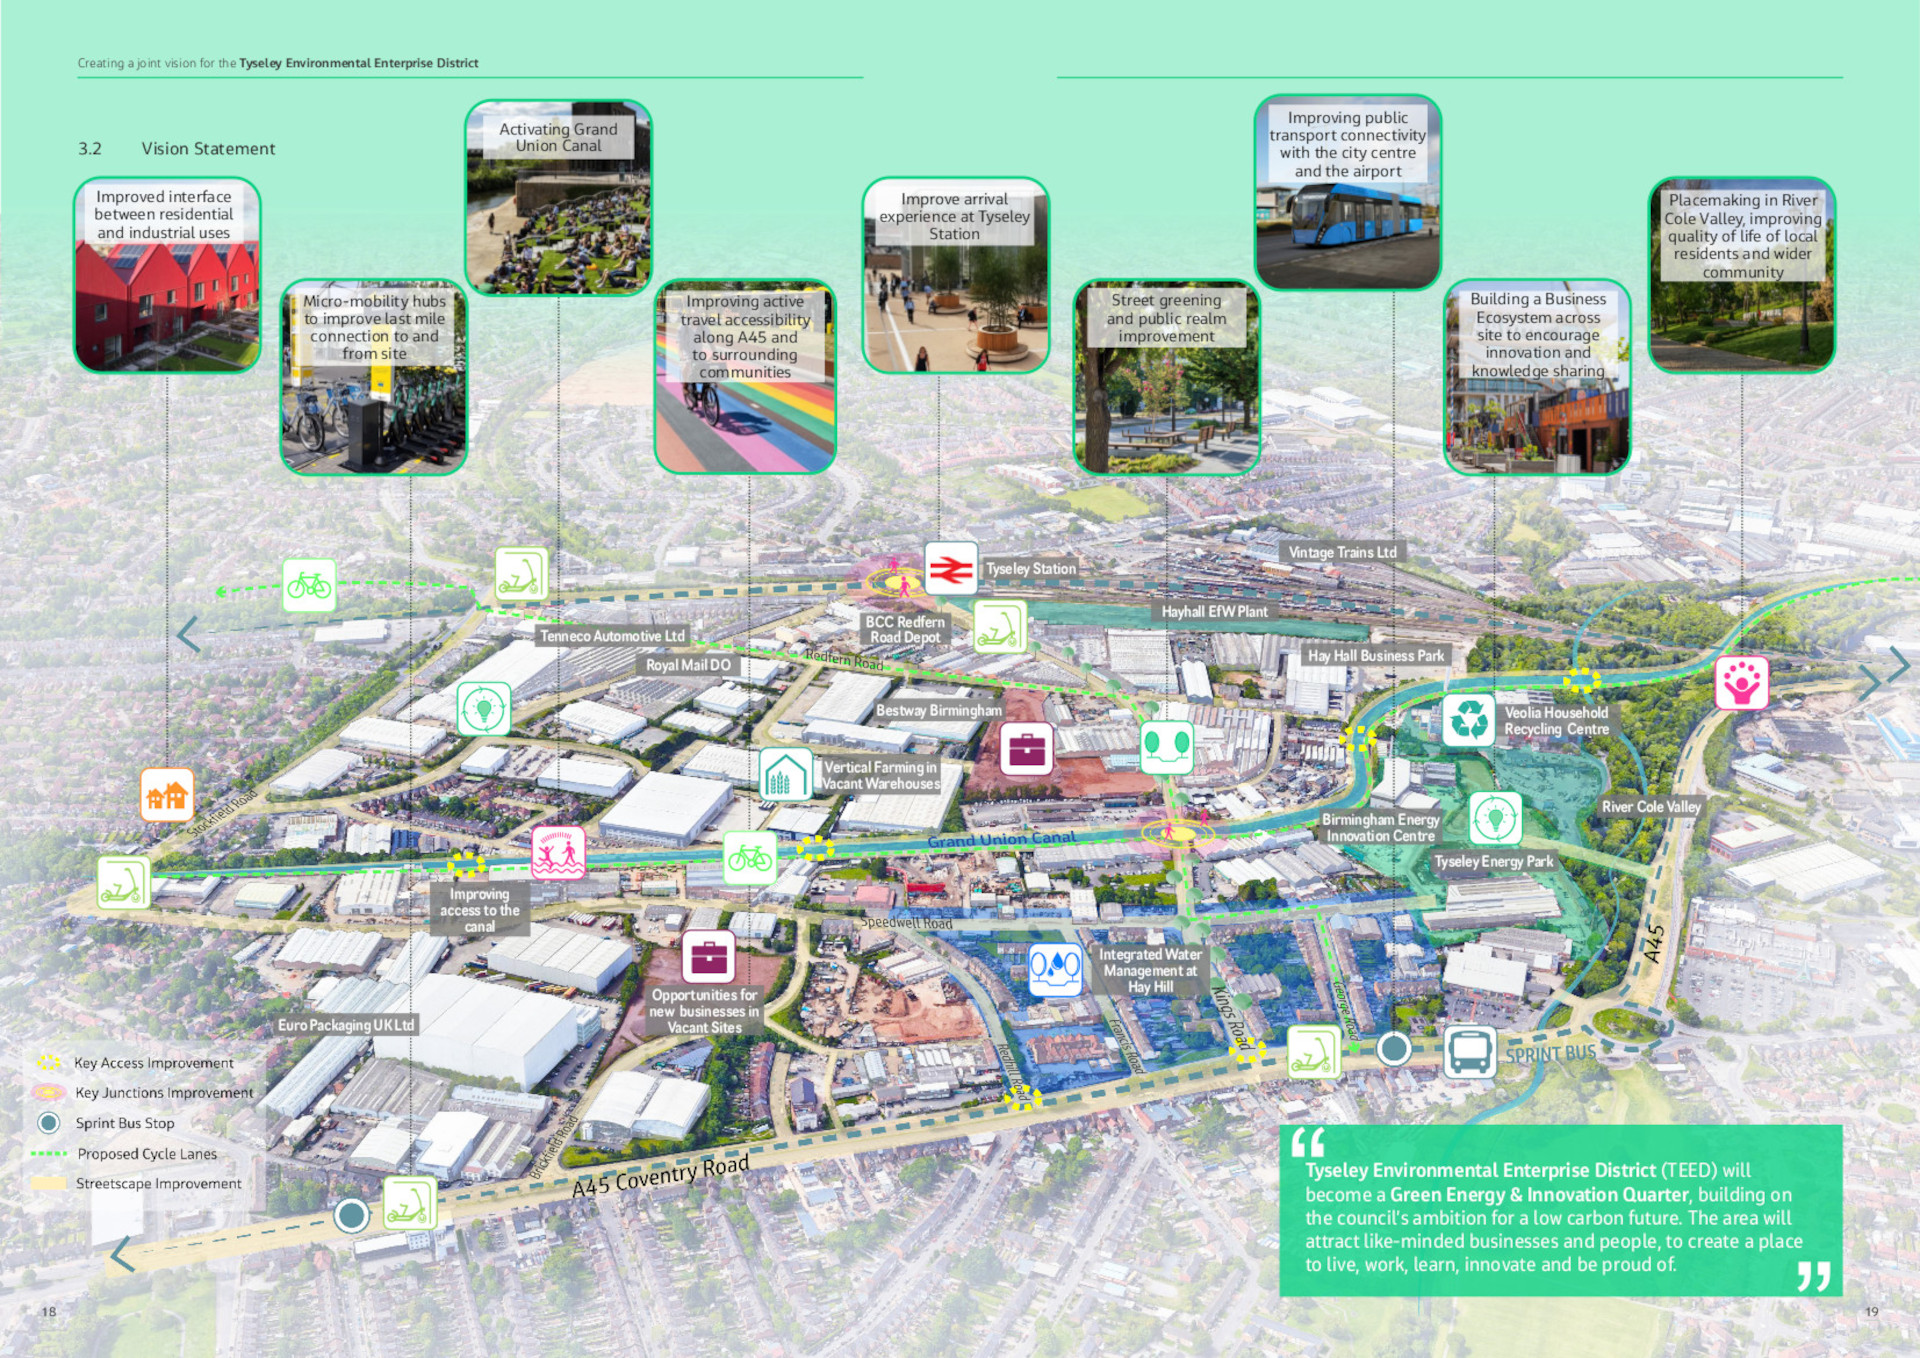 A vision image highlighting the opportunities within the TEED area